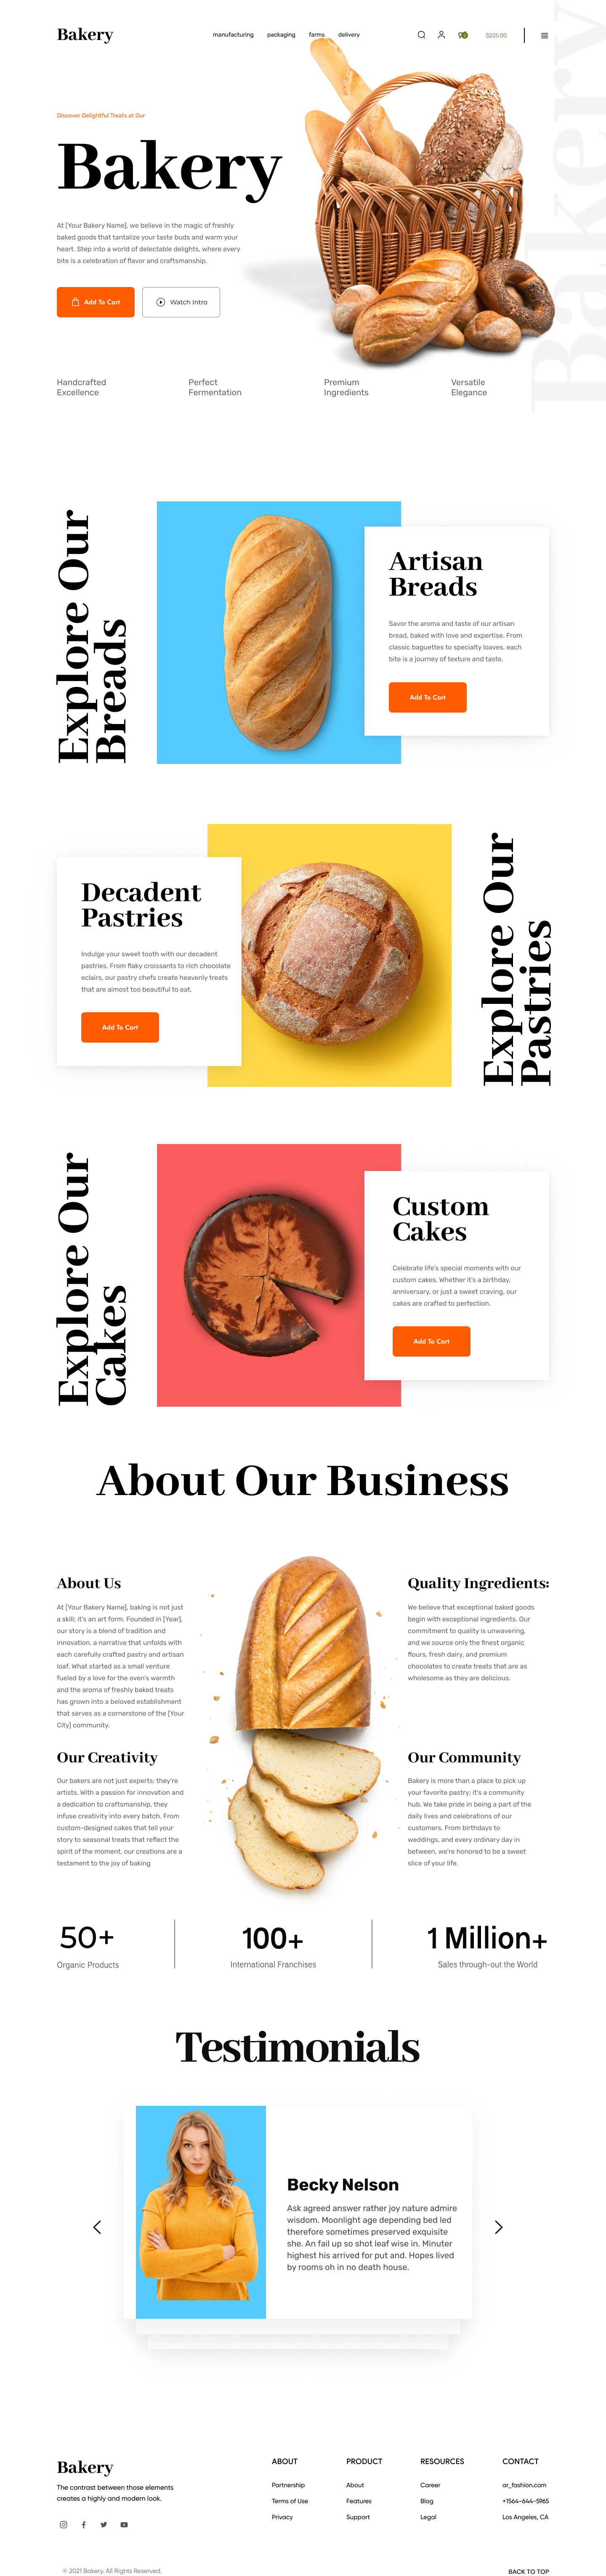 Full Preview of Bakery Shopify Store Design